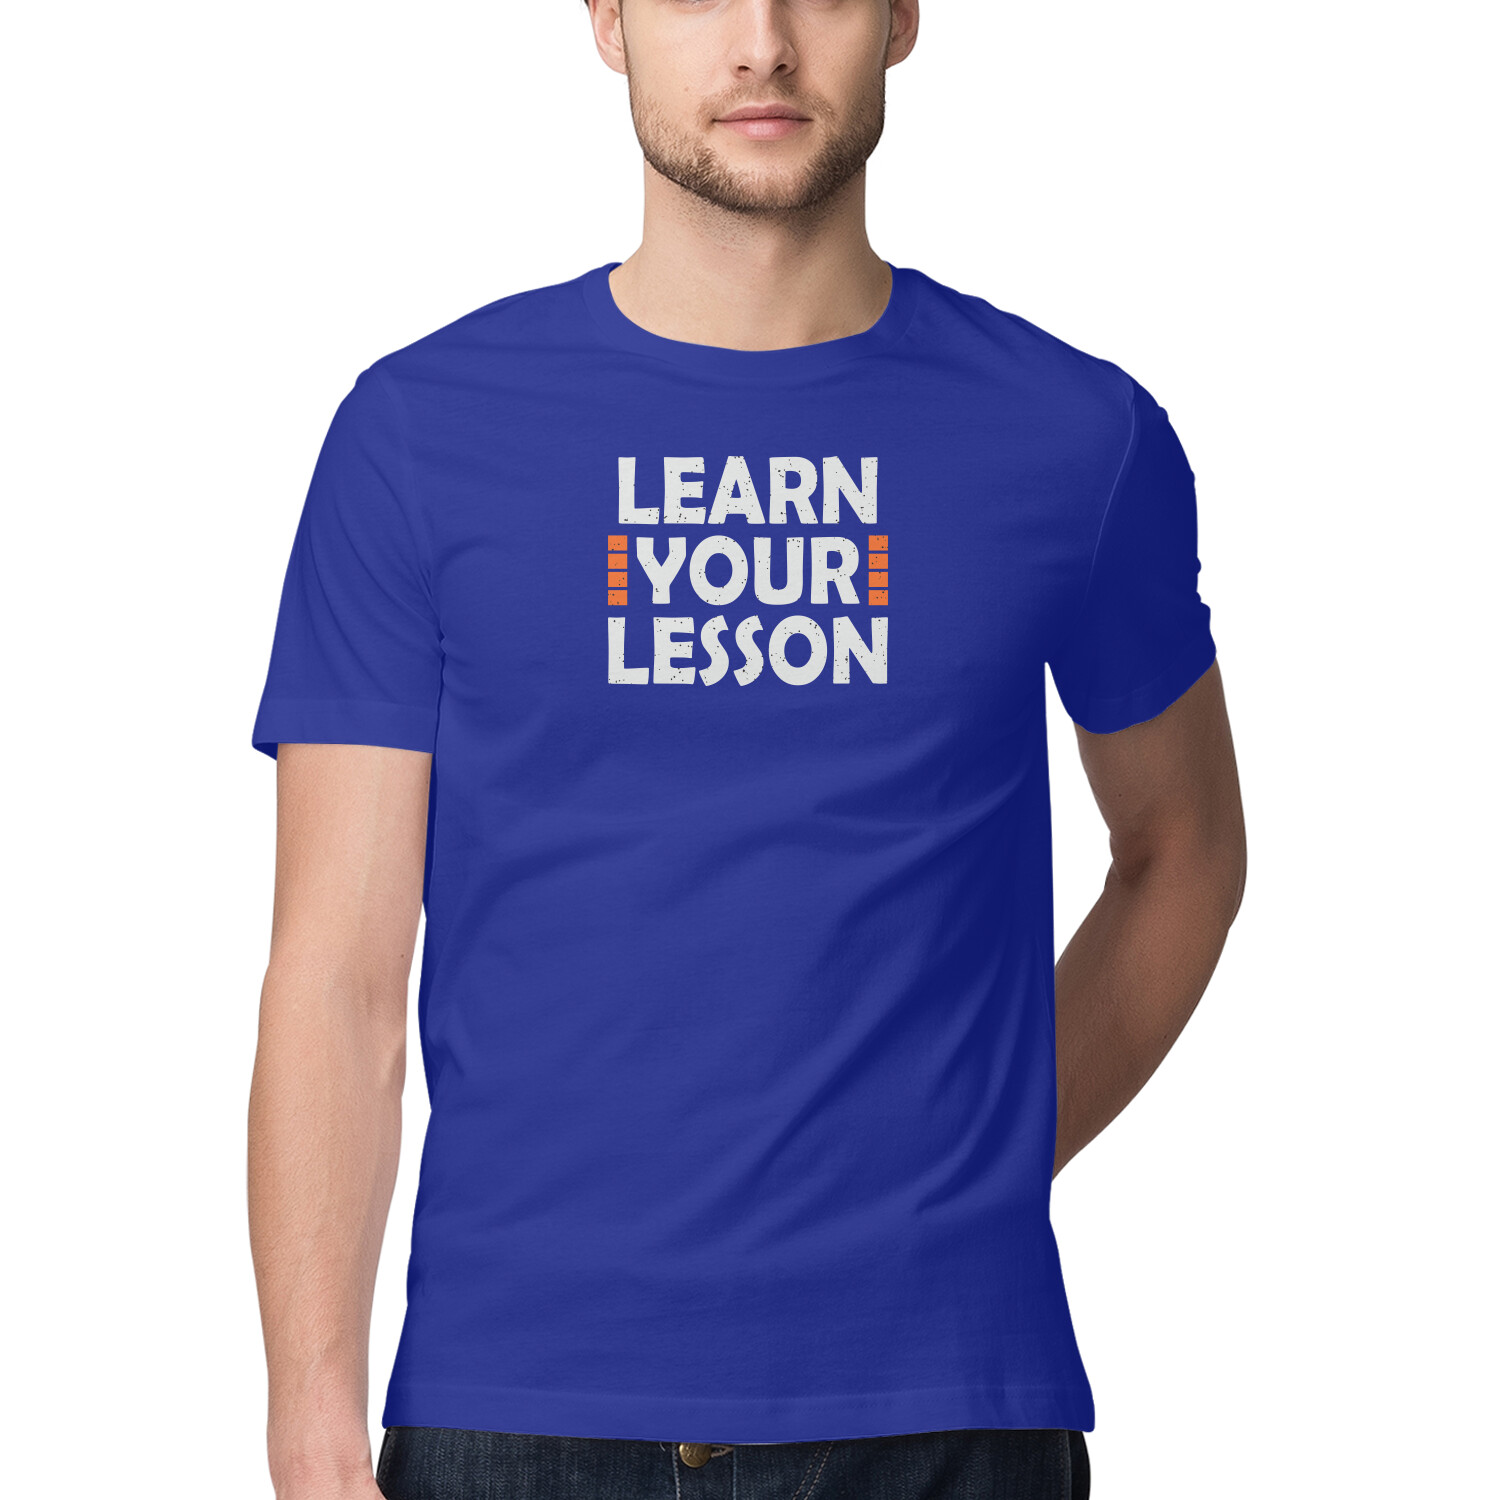 learn your lesson, Funny T-shirt quotes and sayings